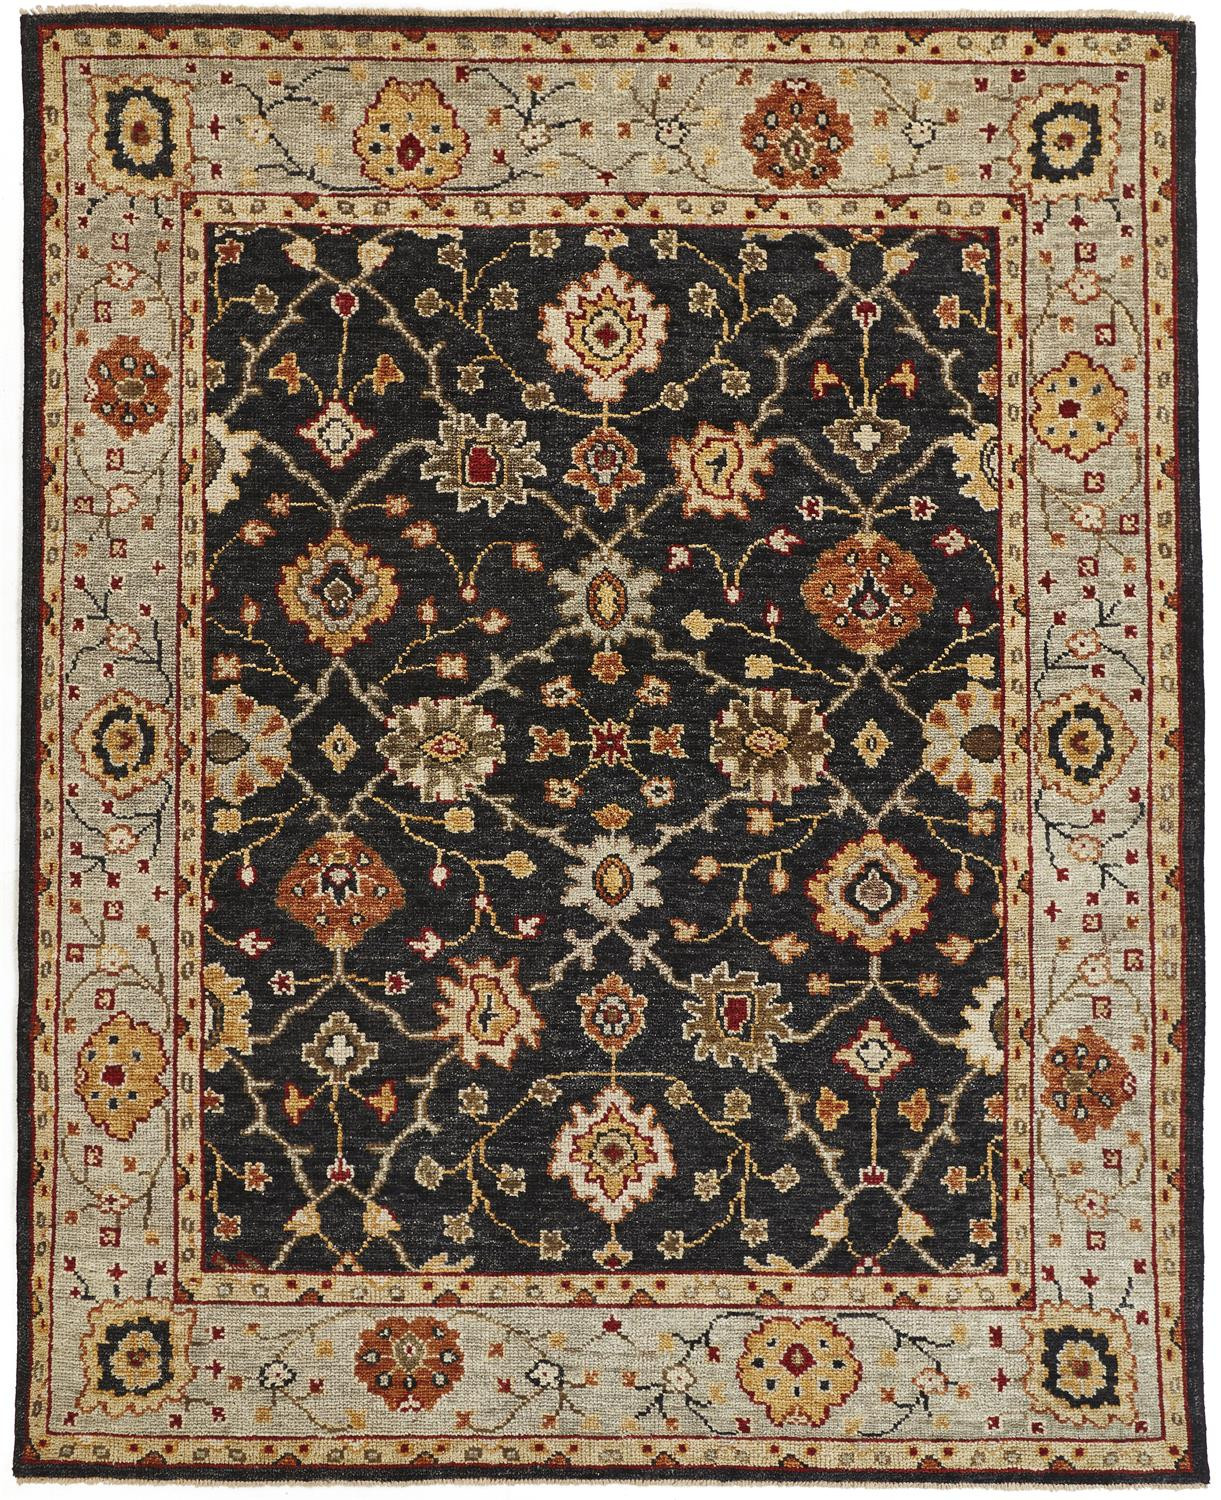 10' X 13' Black Gold And Gray Wool Floral Hand Knotted Stain Resistant Area Rug With Fringe-512600-1